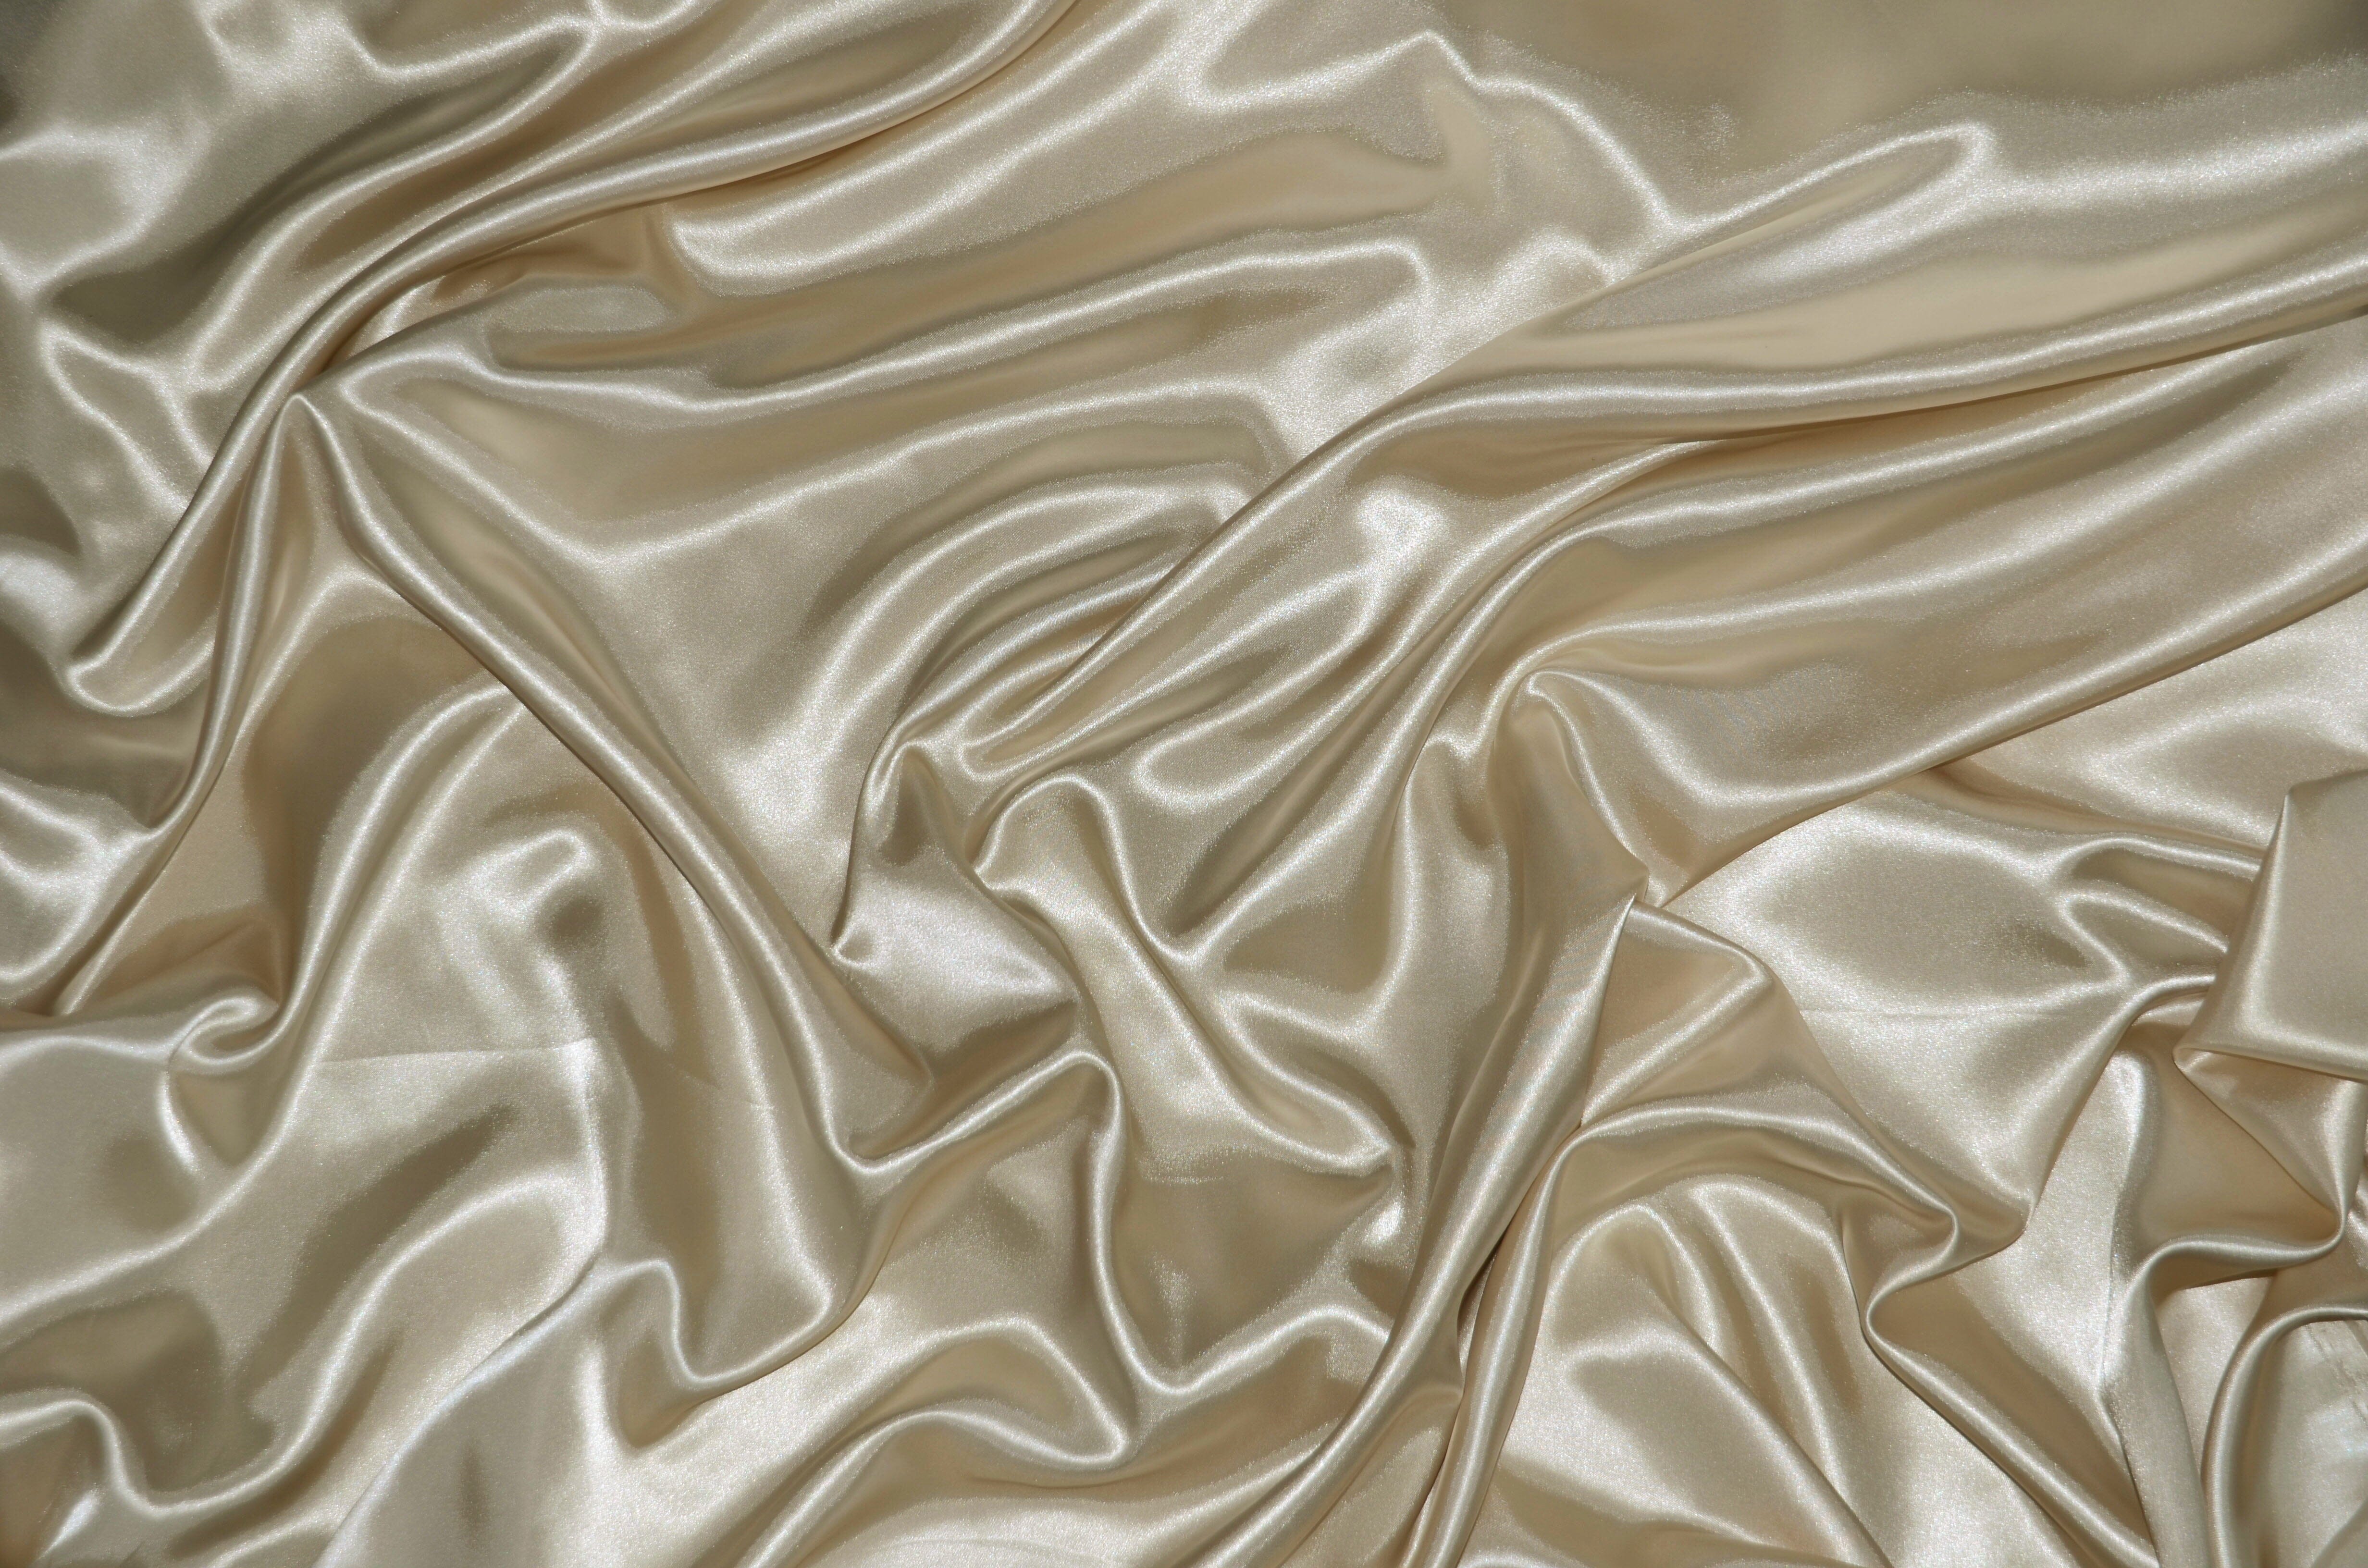 Stretch Charmeuse Satin Fabric | Soft Silky Satin Fabric | 96% Polyester 4% Spandex | Multiple Colors | Sample Swatch | Fabric mytextilefabric Champagne 